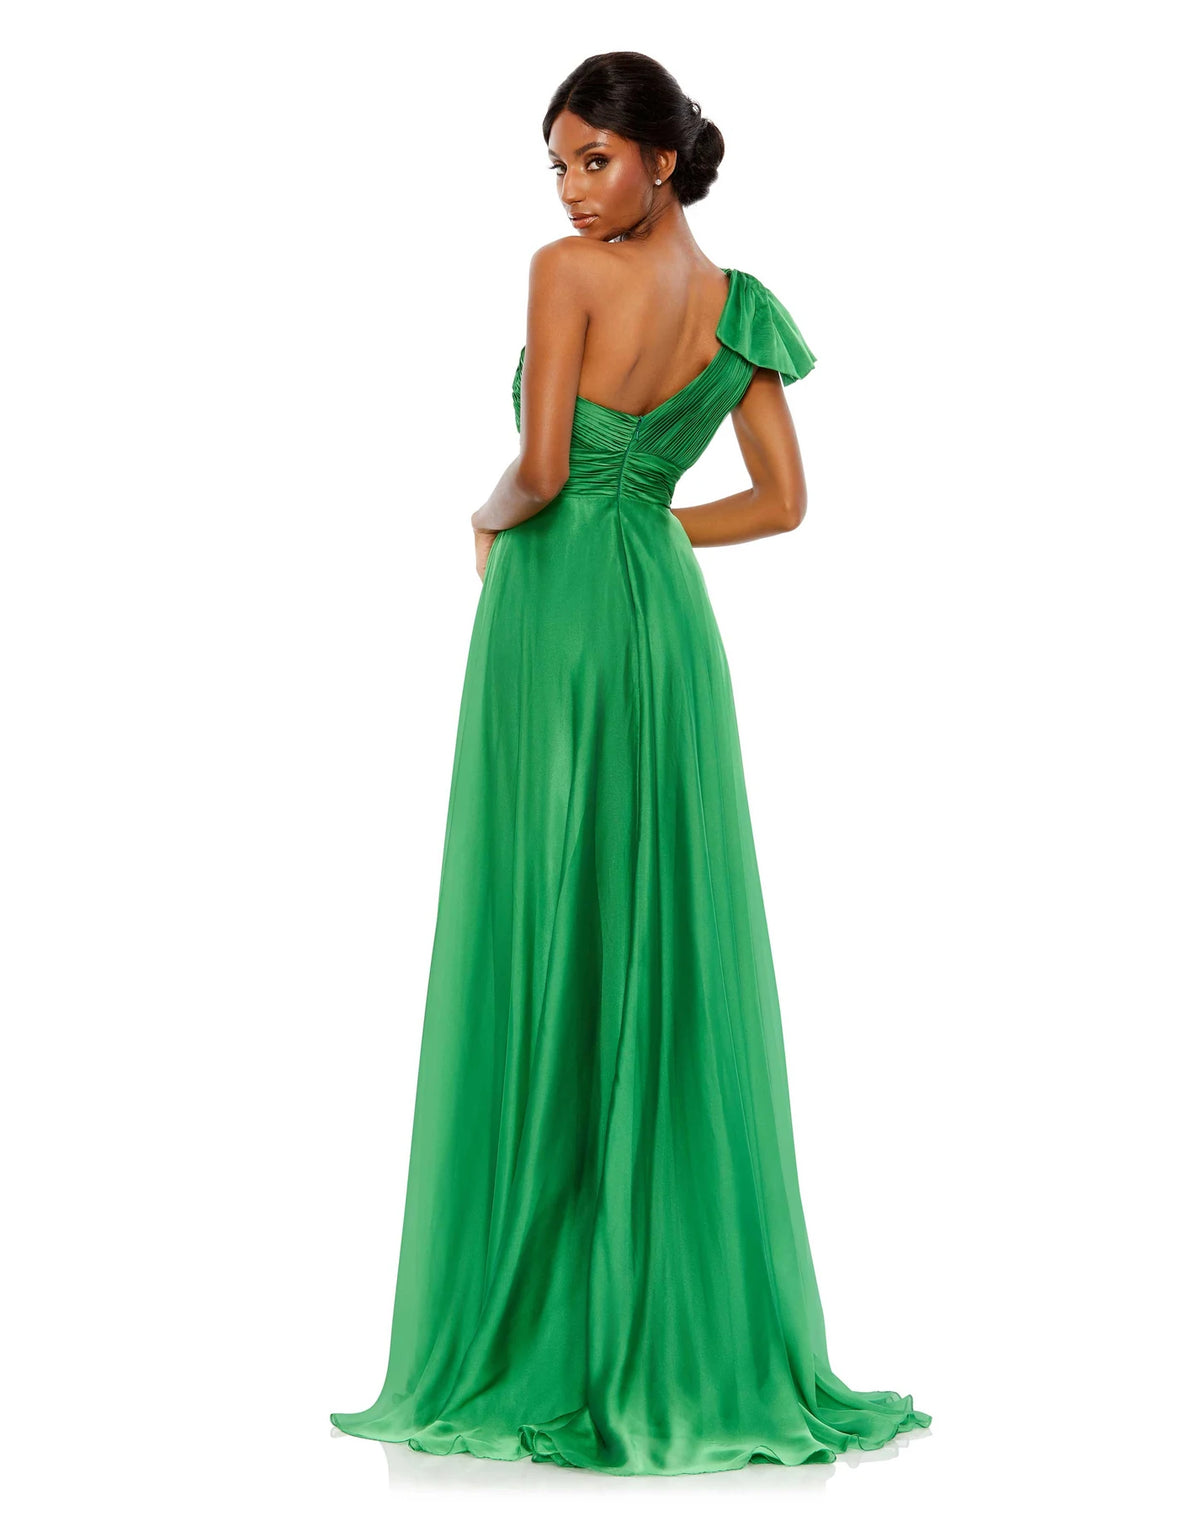 This elegant Mac Duggal one-sleeved emerald green, dress is a stunning formal gown for special occasions. With beautiful draped asymmetric detail across one shoulder and an empire bust together with a flower skirt, this elegant gown will truly have you feeling like the belle of the ball back view